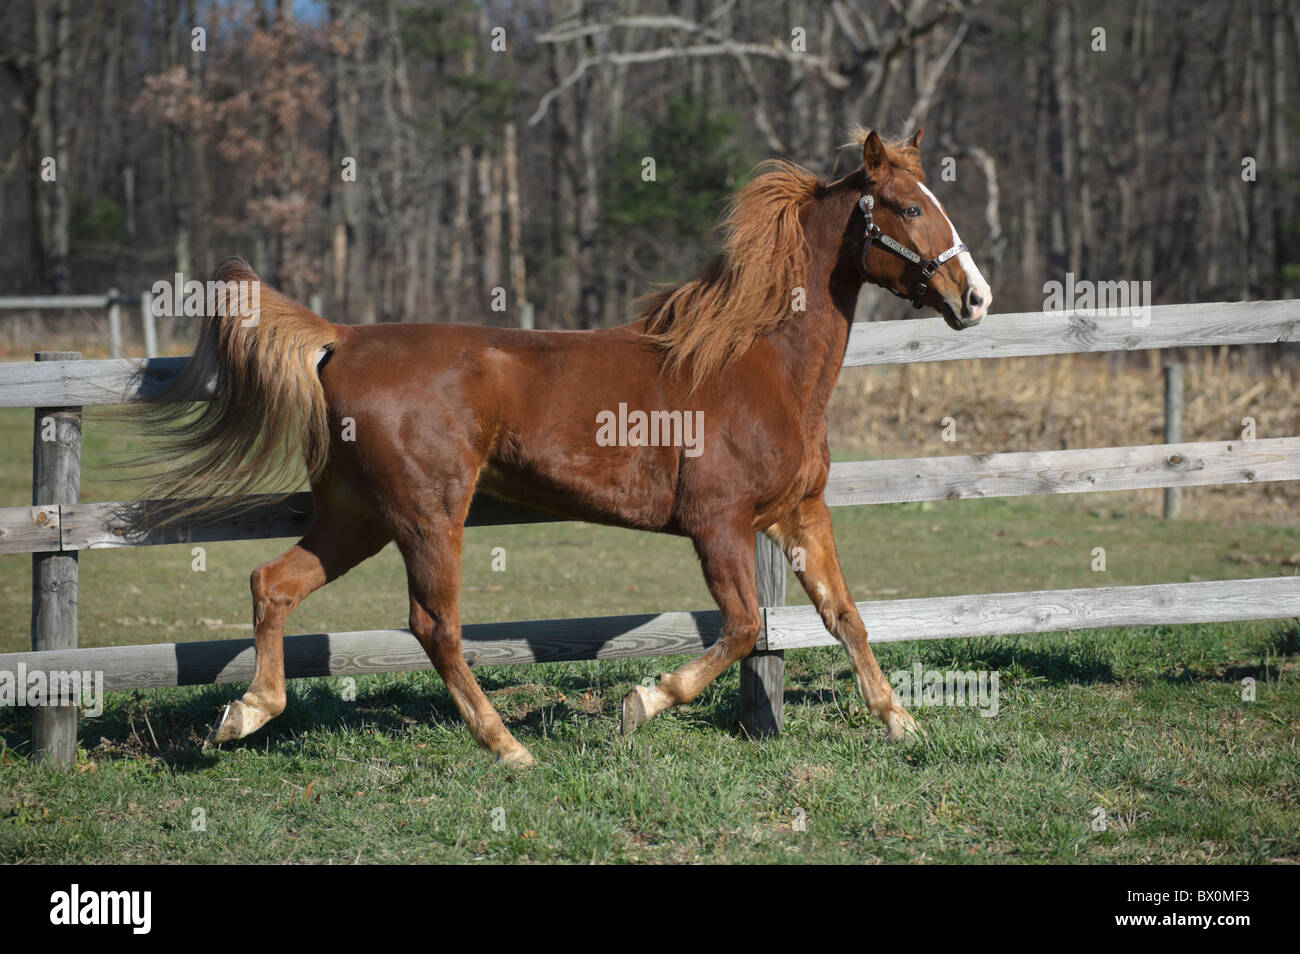 Horse in motion running along a weathered fence line, red sorrel Tennessee Walker in winter coat. Stock Photo